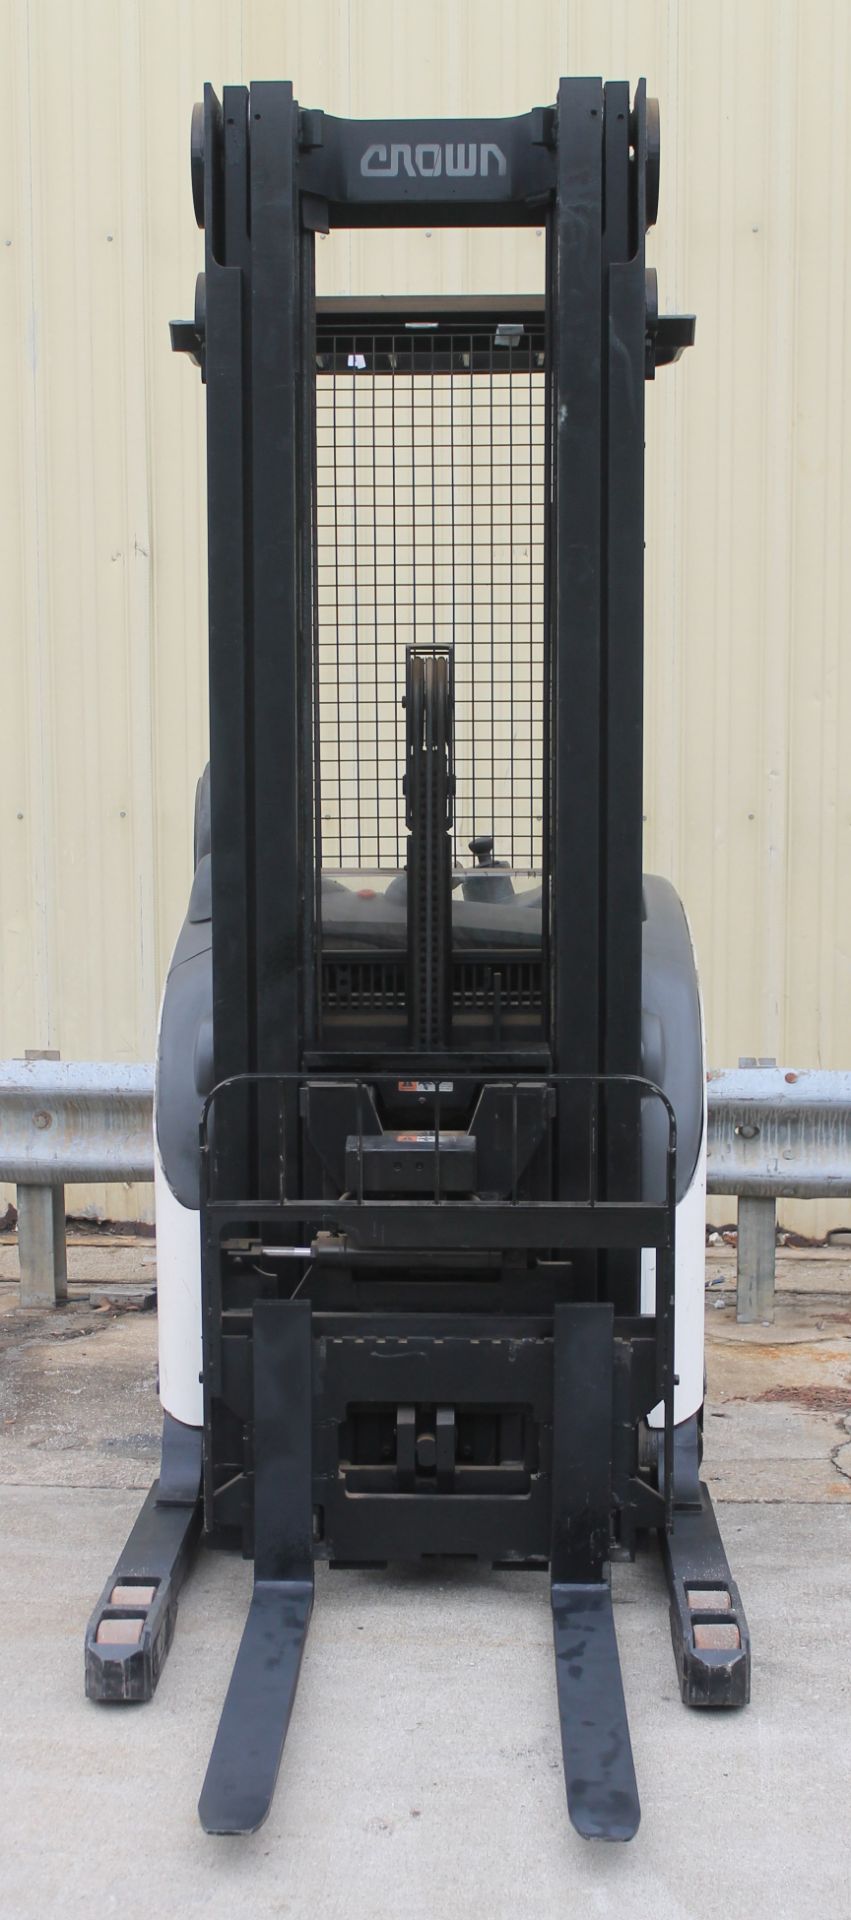 CROWN RD 5000 SERIES NARROW-AISLE REACH TRUCK, DOUBLE REACH, (WATCH VIDEO) - Image 5 of 6